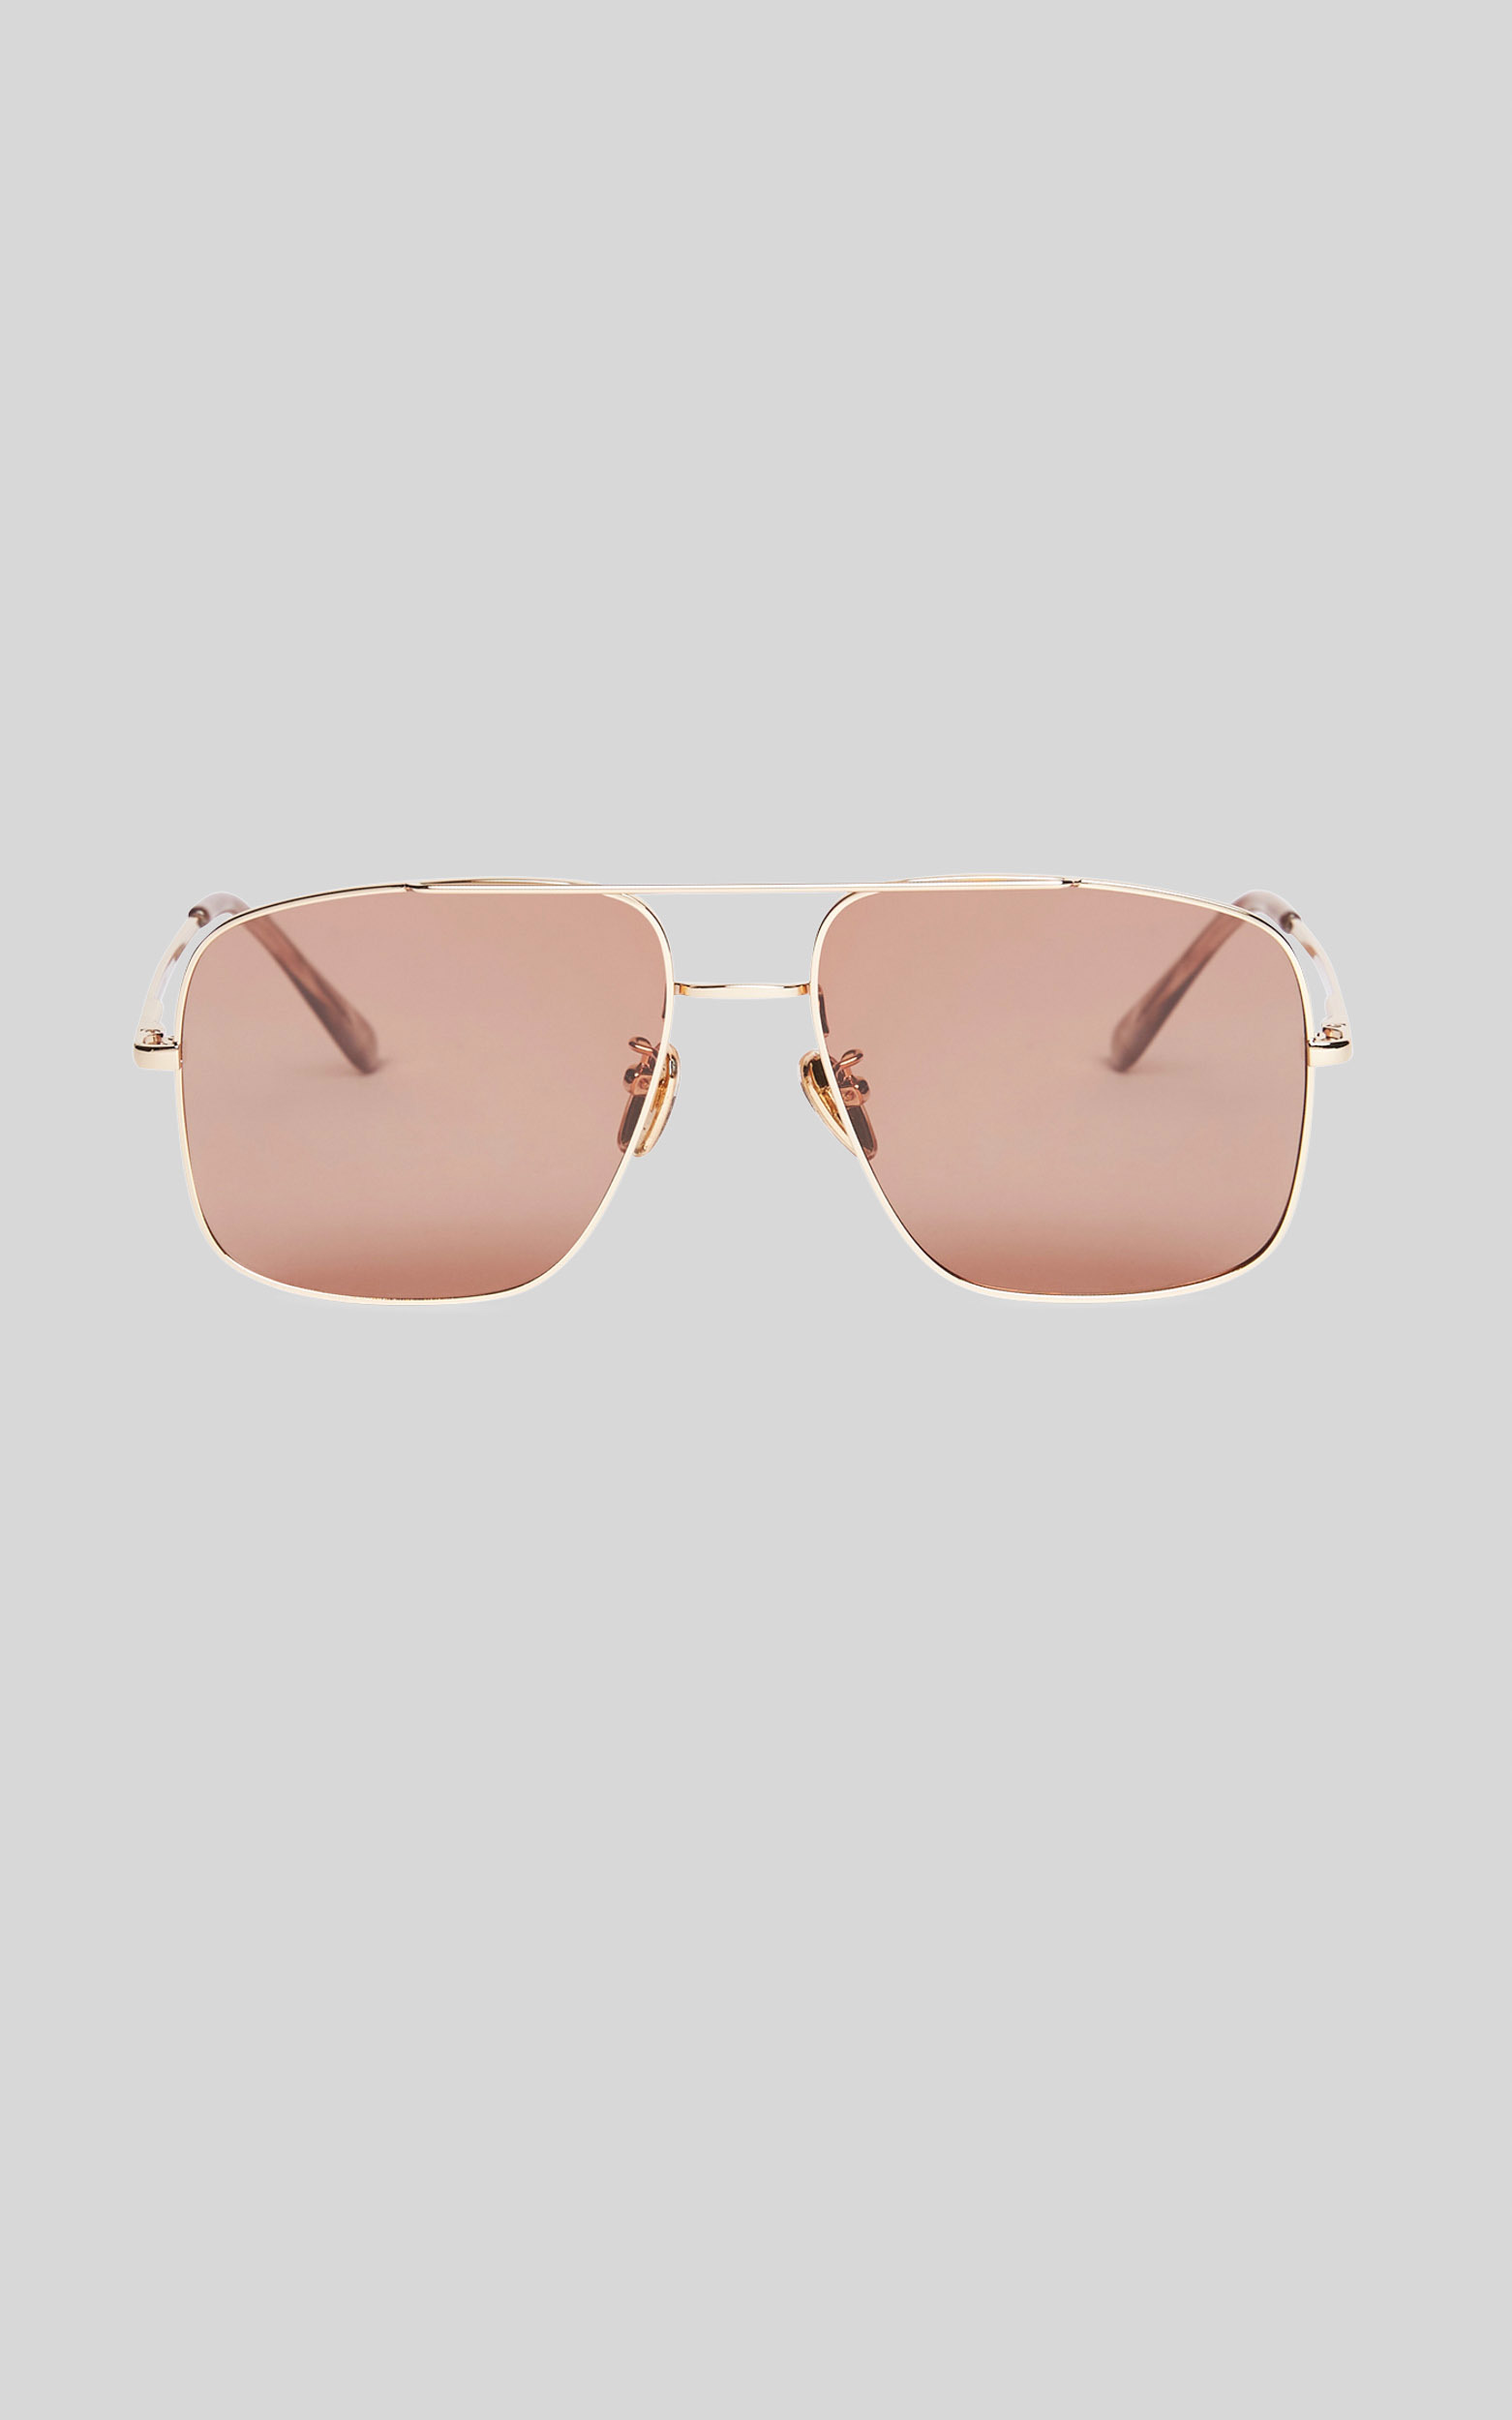 Banbe Eyewear - The Maxwell in Gold Caramel - NoSize, BRN1, hi-res image number null